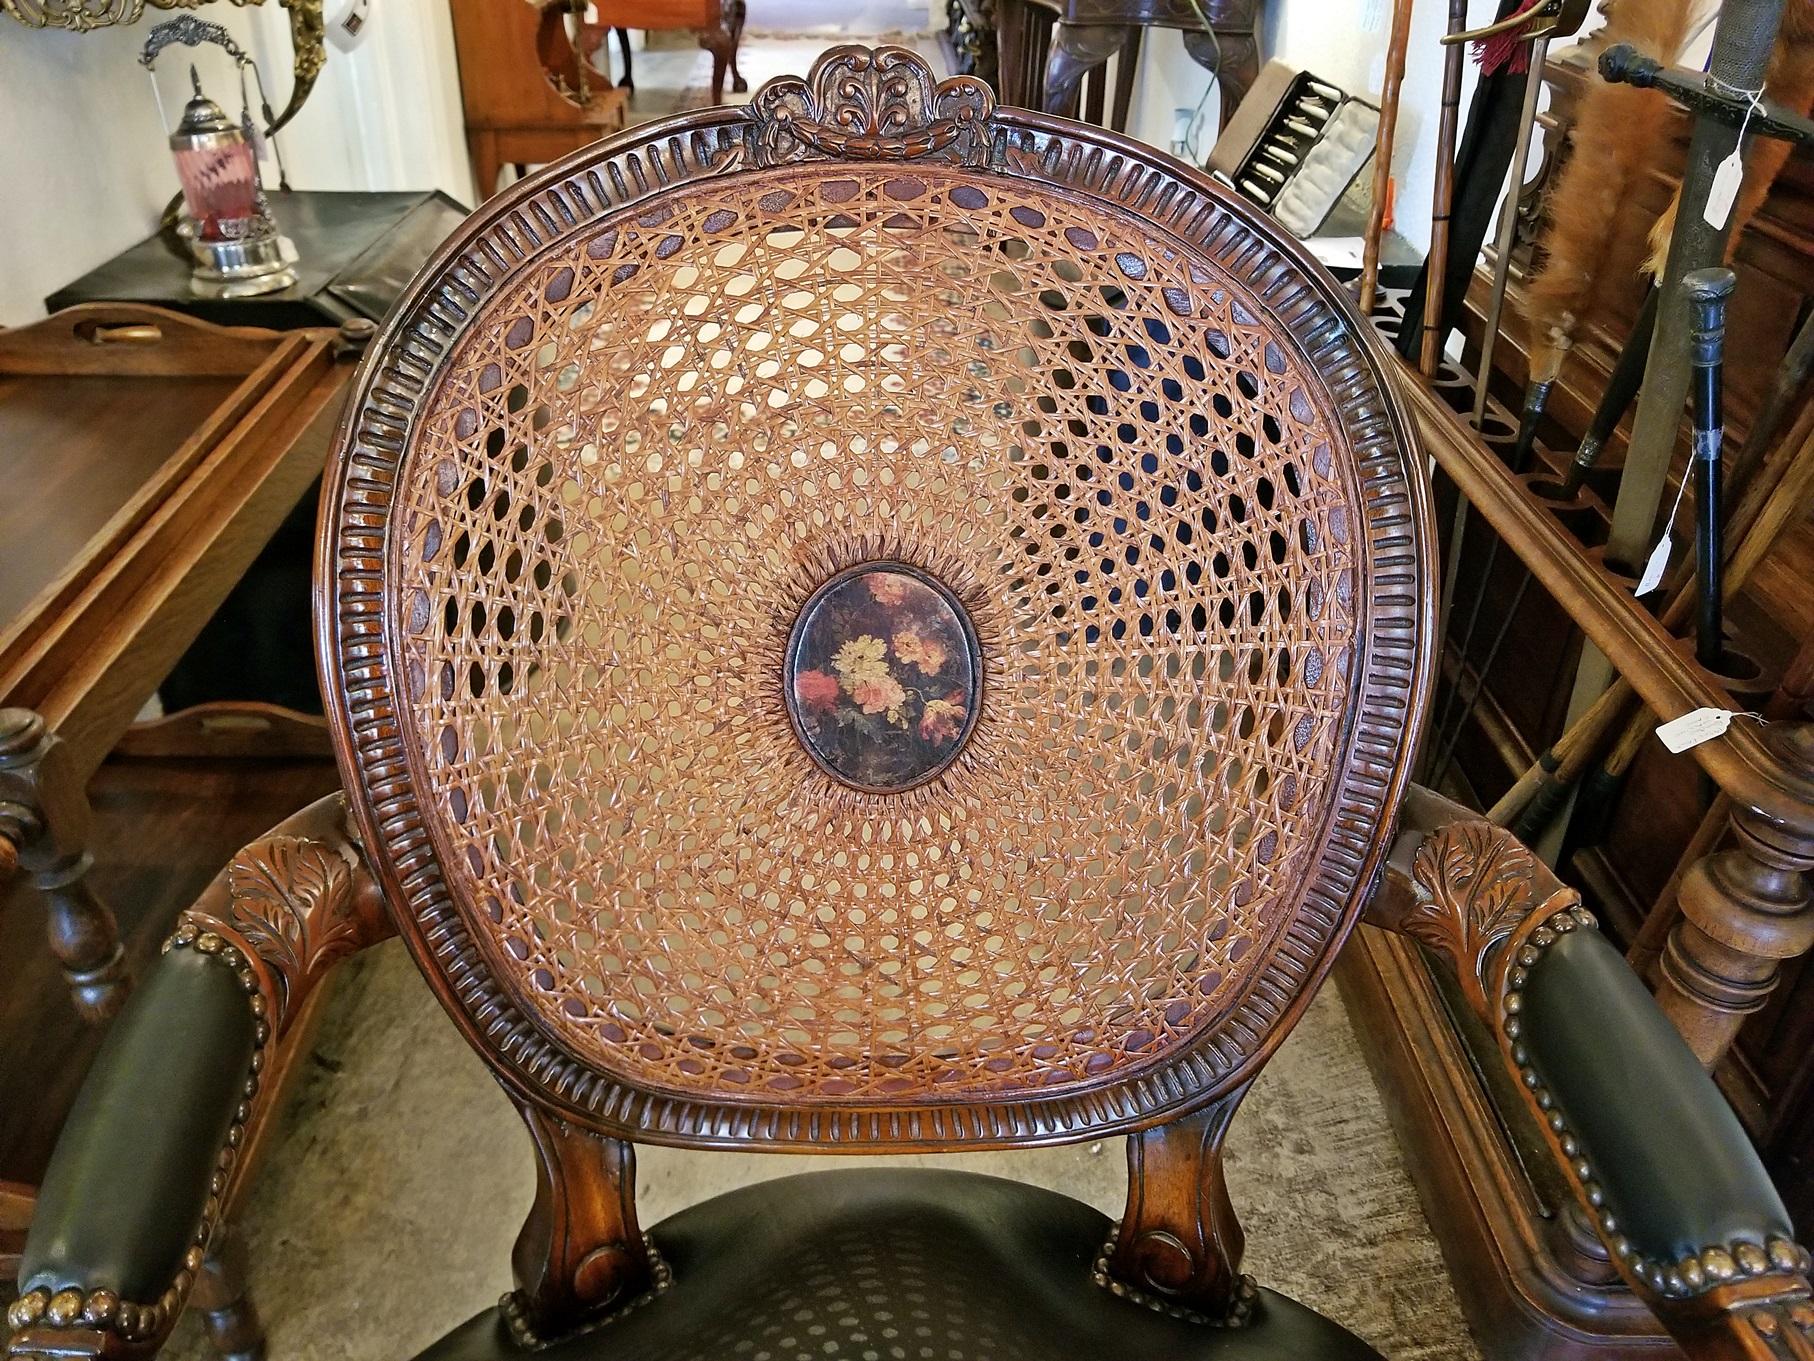 Presenting an beautiful 20th century French cane backed Bergiere chair by Theodore Alexander of NY.

Firstly, in this industry there are 4 categories:- (1) Original period antiques, (2) “Fakes” which are made to deceive, (3) ‘Reproductions’ which